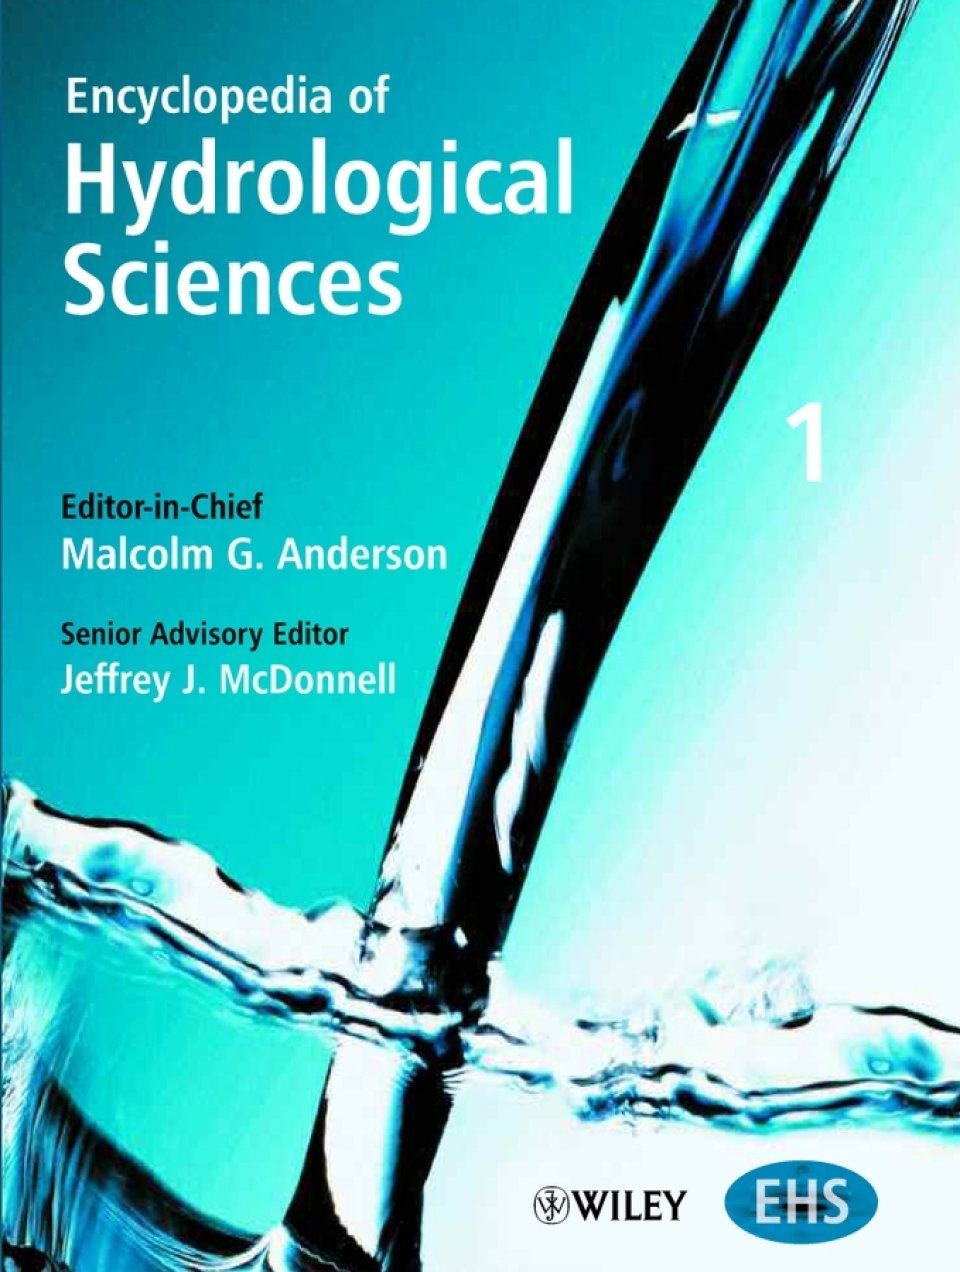 Encyclopedia of Hydrological Sciences